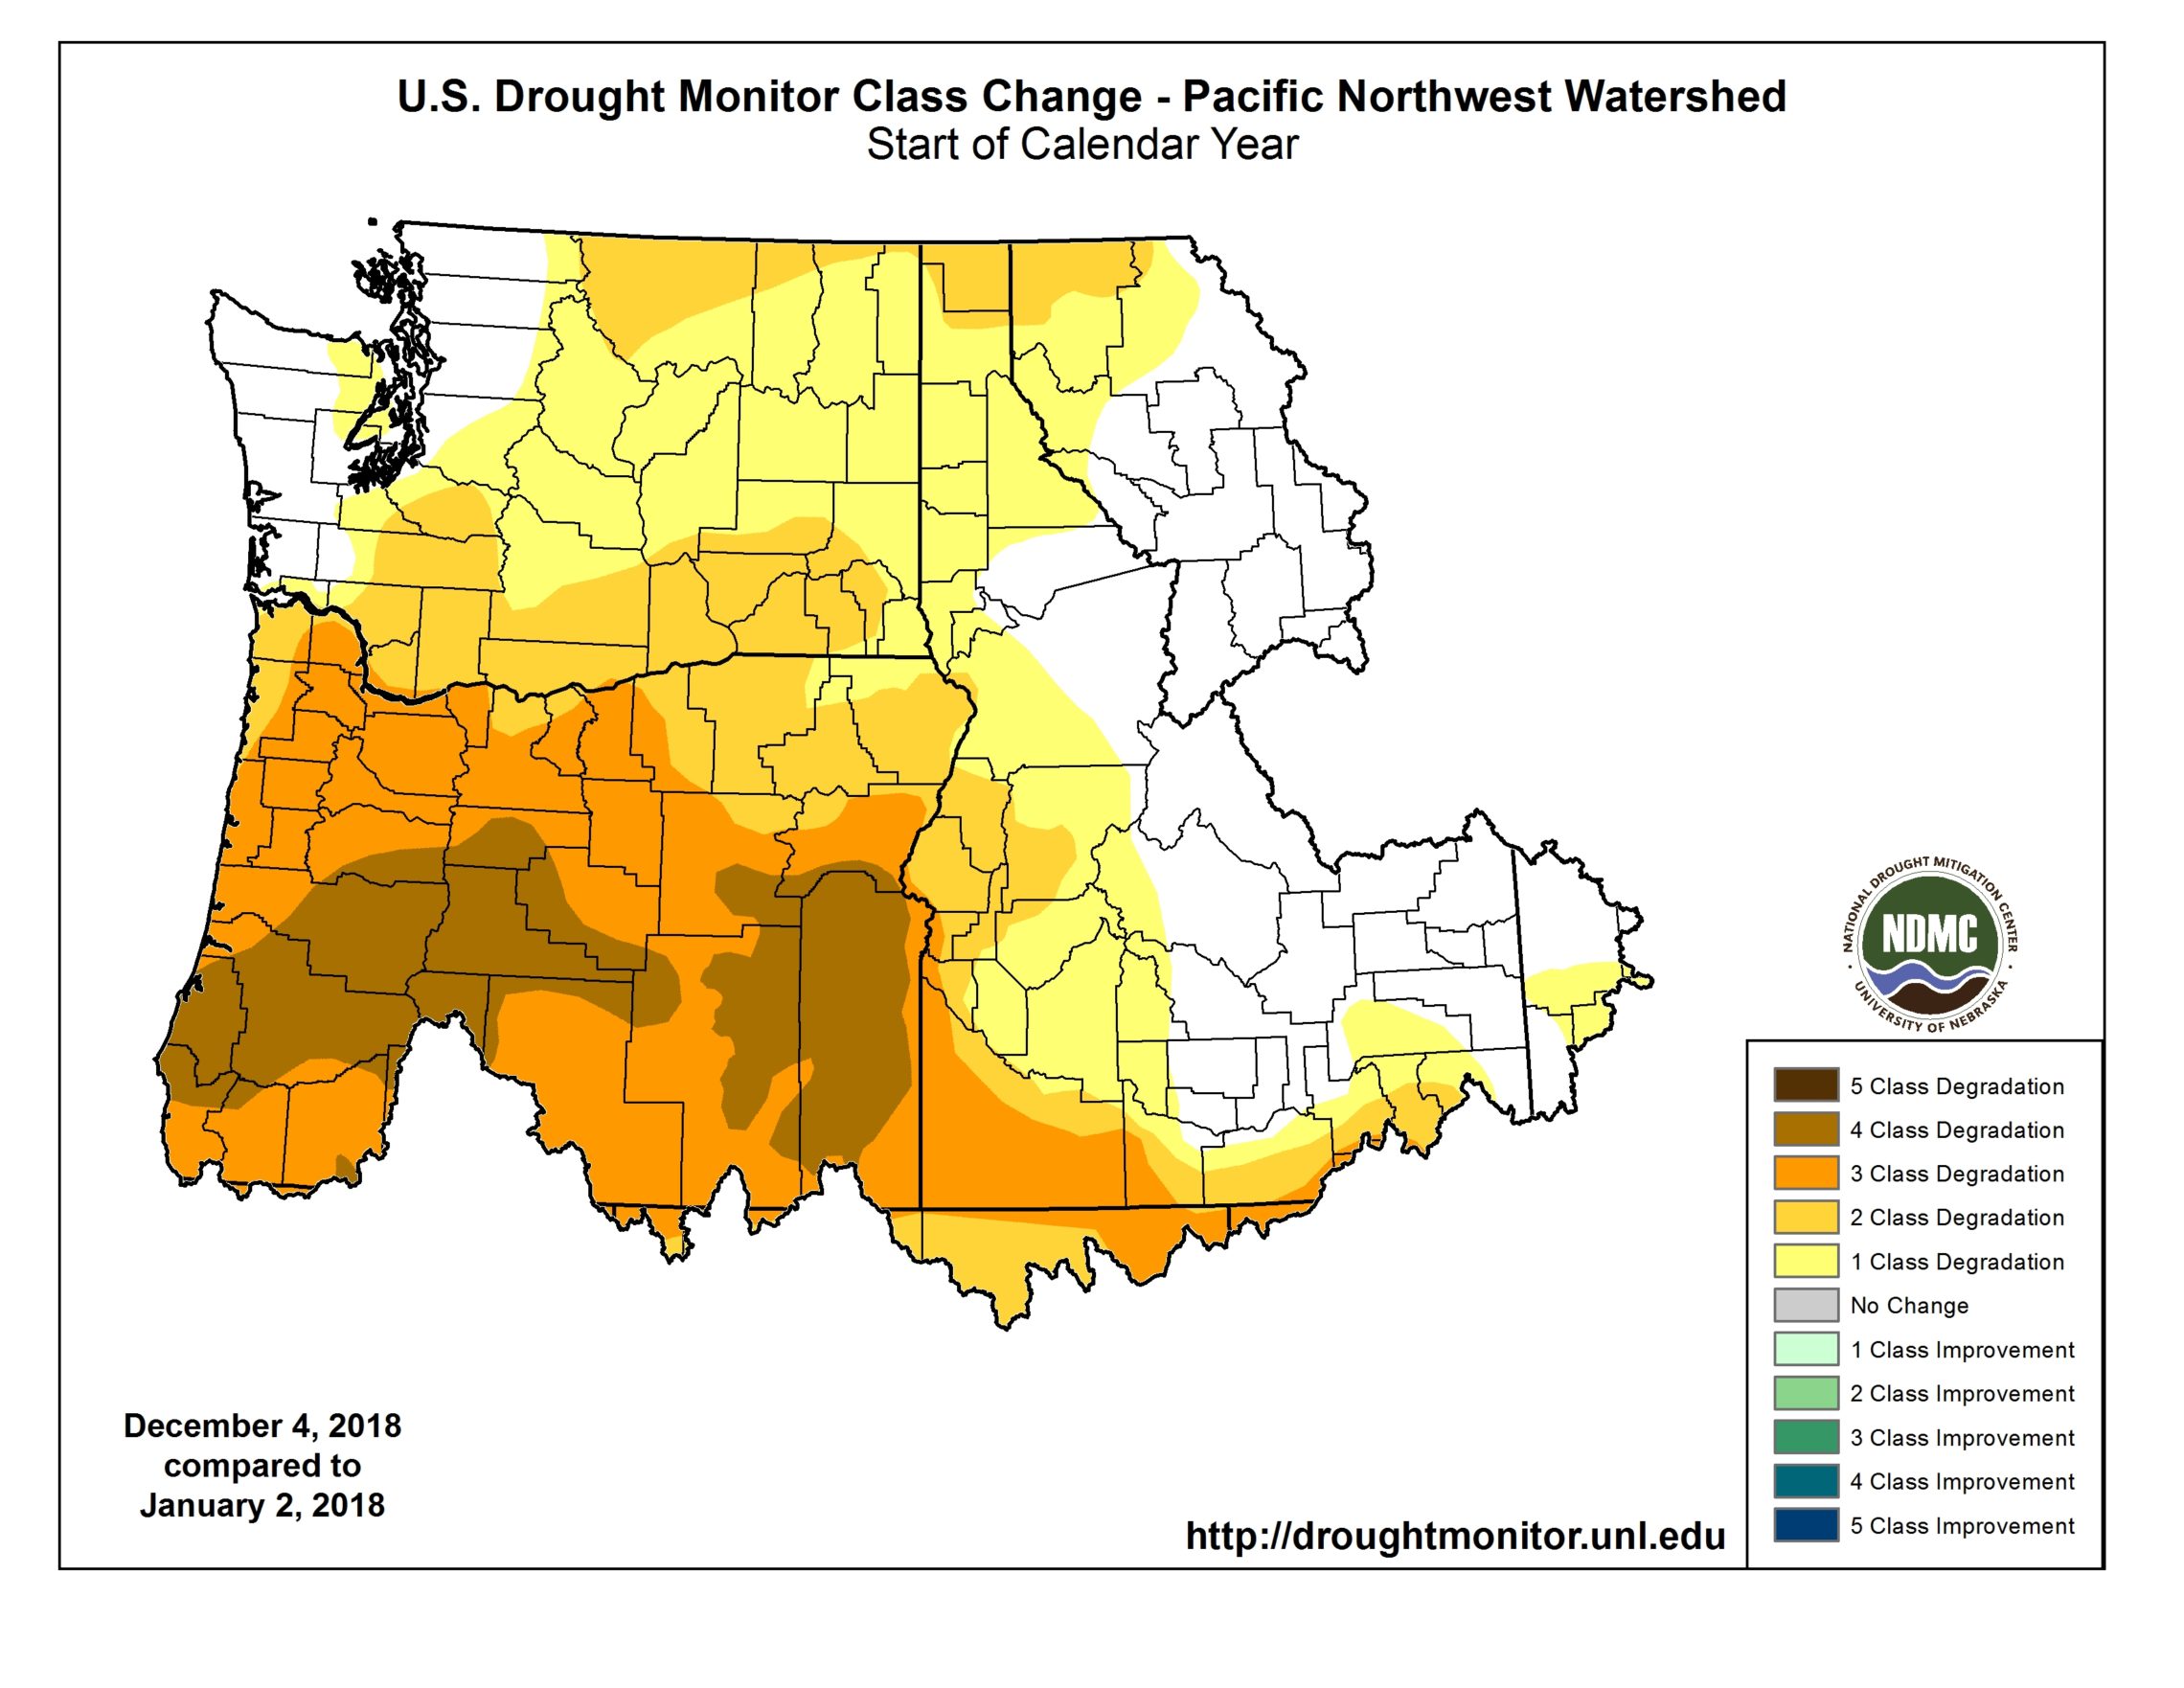 The Northwest watershed shows areas of abnormal dryness to severe drought over 2018. CREDIT: U.S. DROUGHT MONITOR